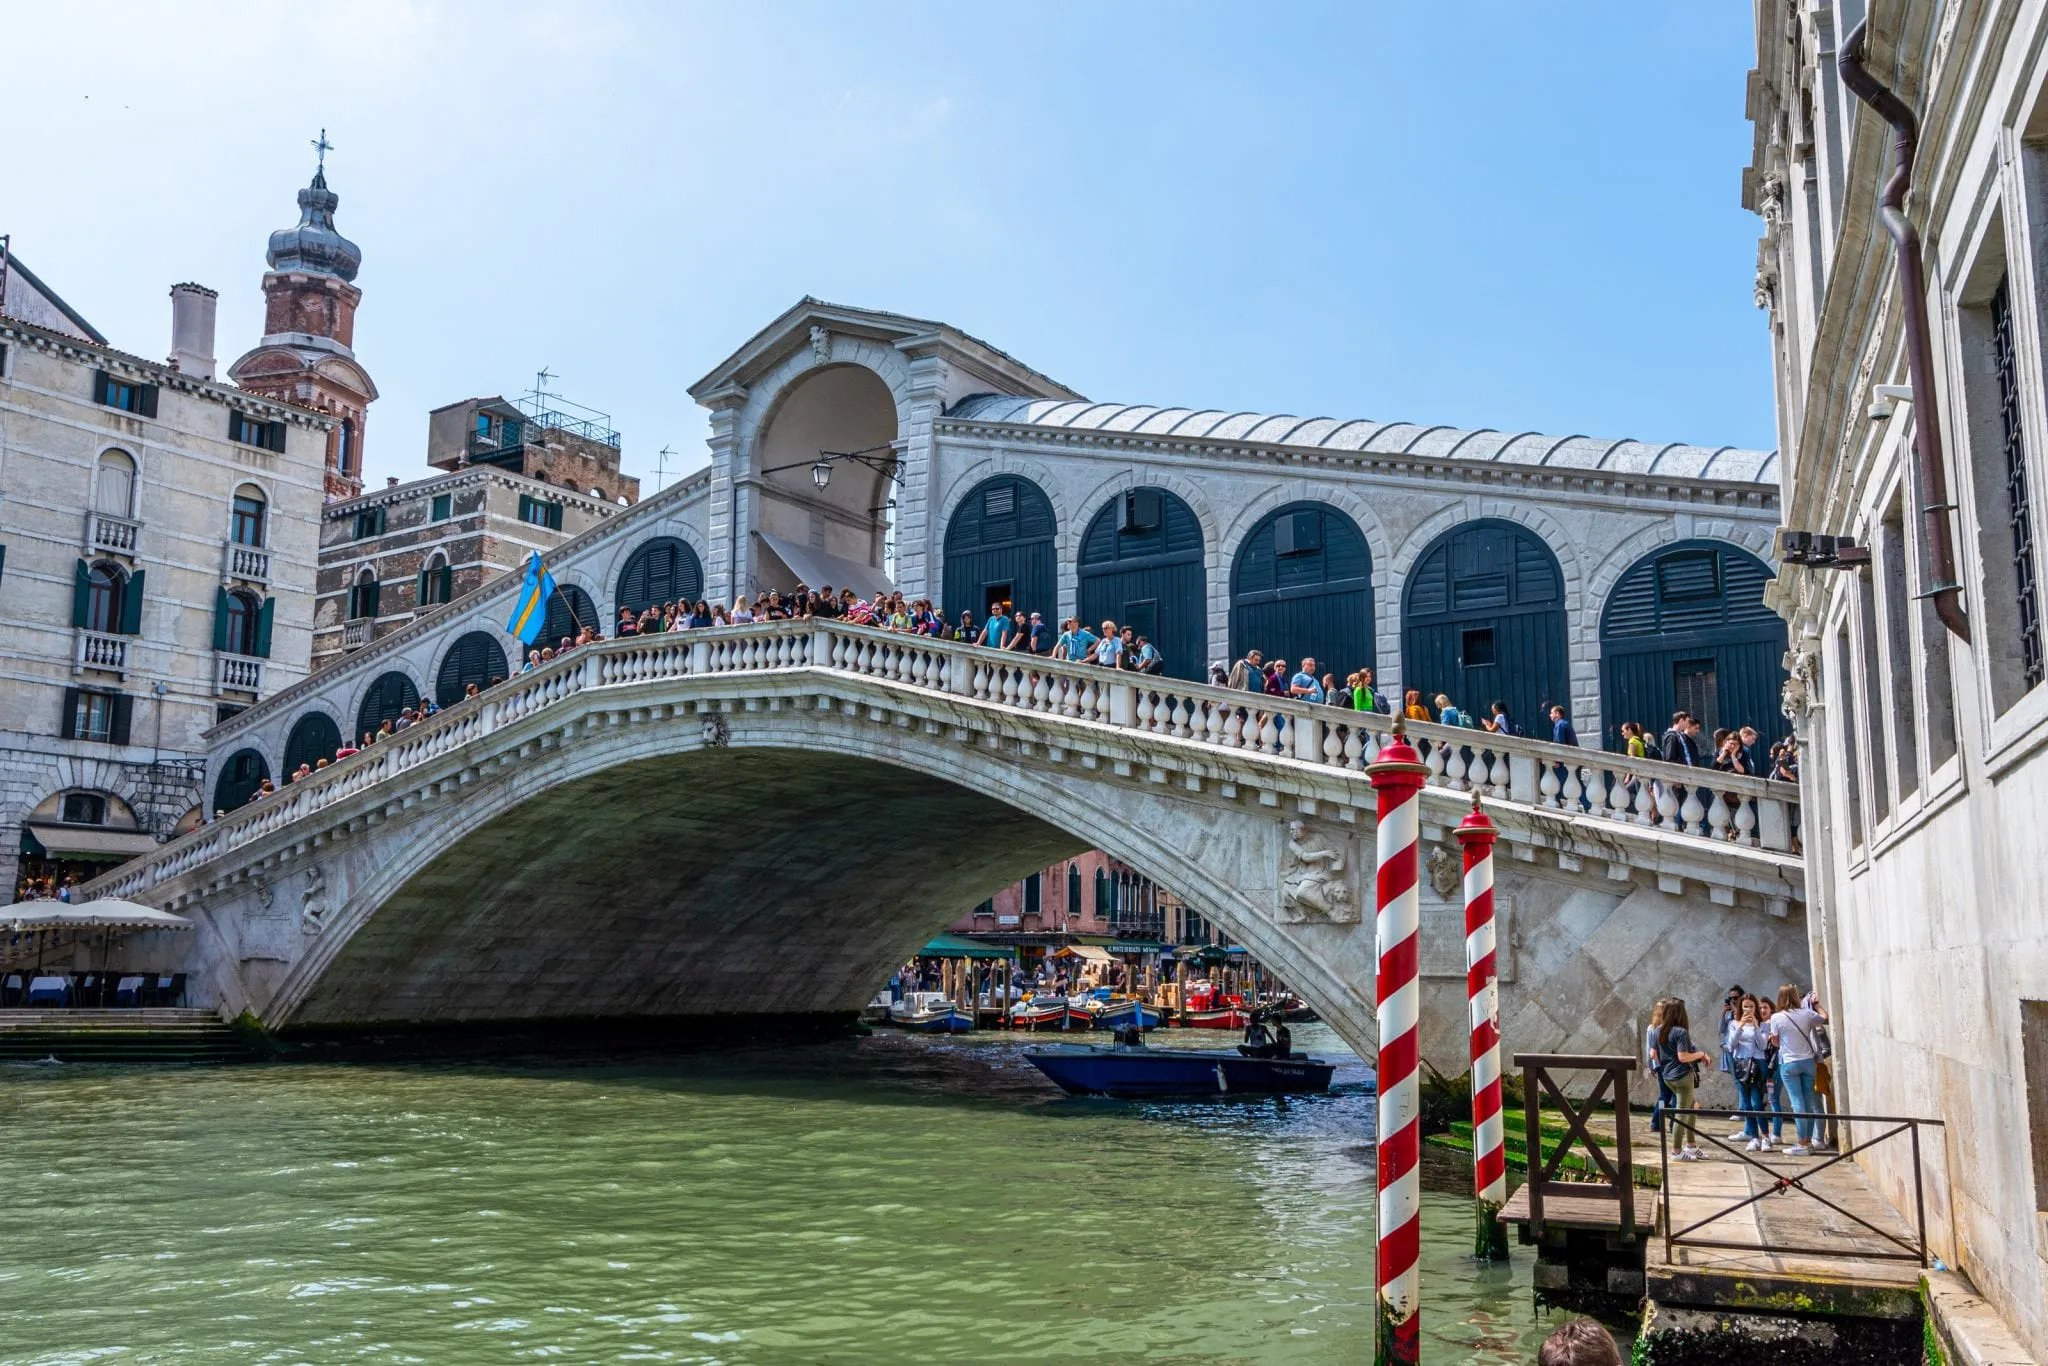 Photo of the Rialto Bridge from below, an essential stop on your 2 days in Venice itinerary!